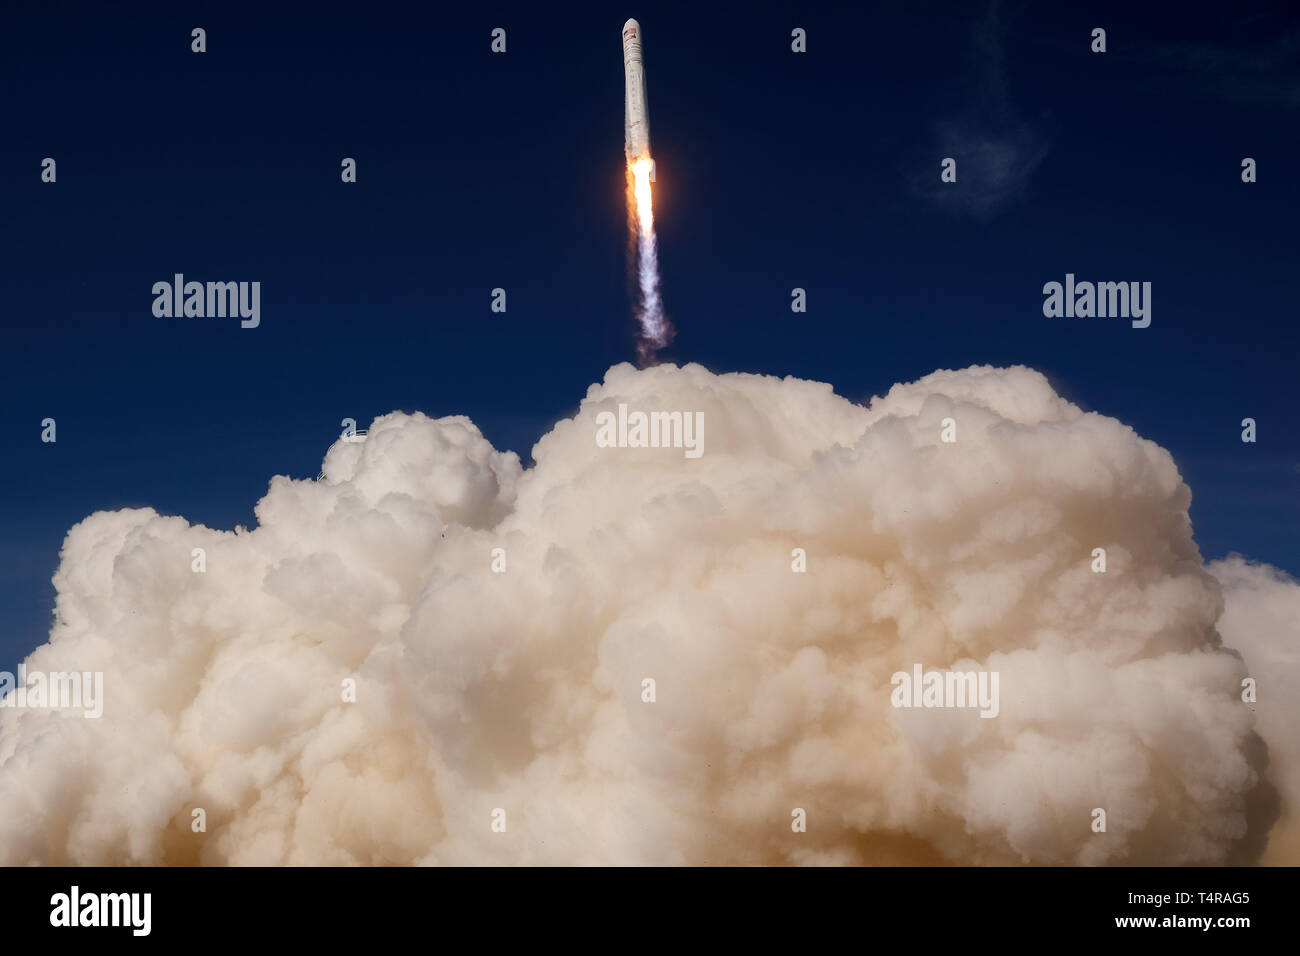 Wallops Island, Virginia, USA. 17th Apr, 2019. The Antares rocket carrying the Cygnus cargo spacecraft lifts off from NASA's Wallops Flight Facility in Wallops Island, Virginia, the United States, on April 17, 2019. A U.S. rocket was launched on Wednesday from NASA's Wallops Flight Facility on Virginia's Eastern Shore, carrying cargo with the space agency's resupply mission for the International Space Station (ISS). The Antares rocket built by Northrop Grumman lifted off at 4:46 p.m. EDT, carrying the Cygnus cargo spacecraft to the ISS. Credit: Xinhua/Alamy Live News Stock Photo